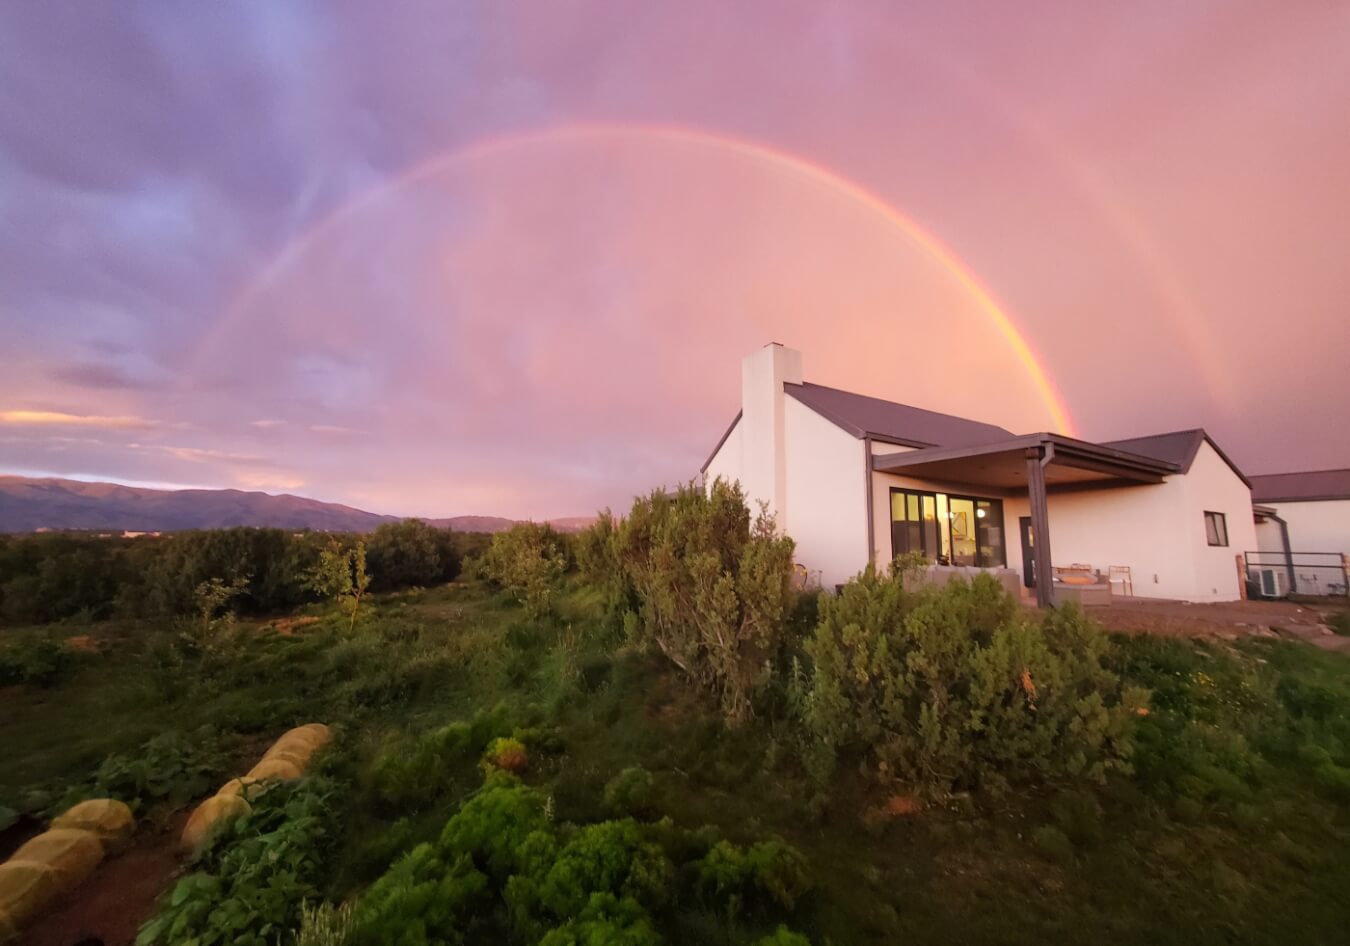 A rainbow is seen over a house in the middle of a field in Santa Fe.